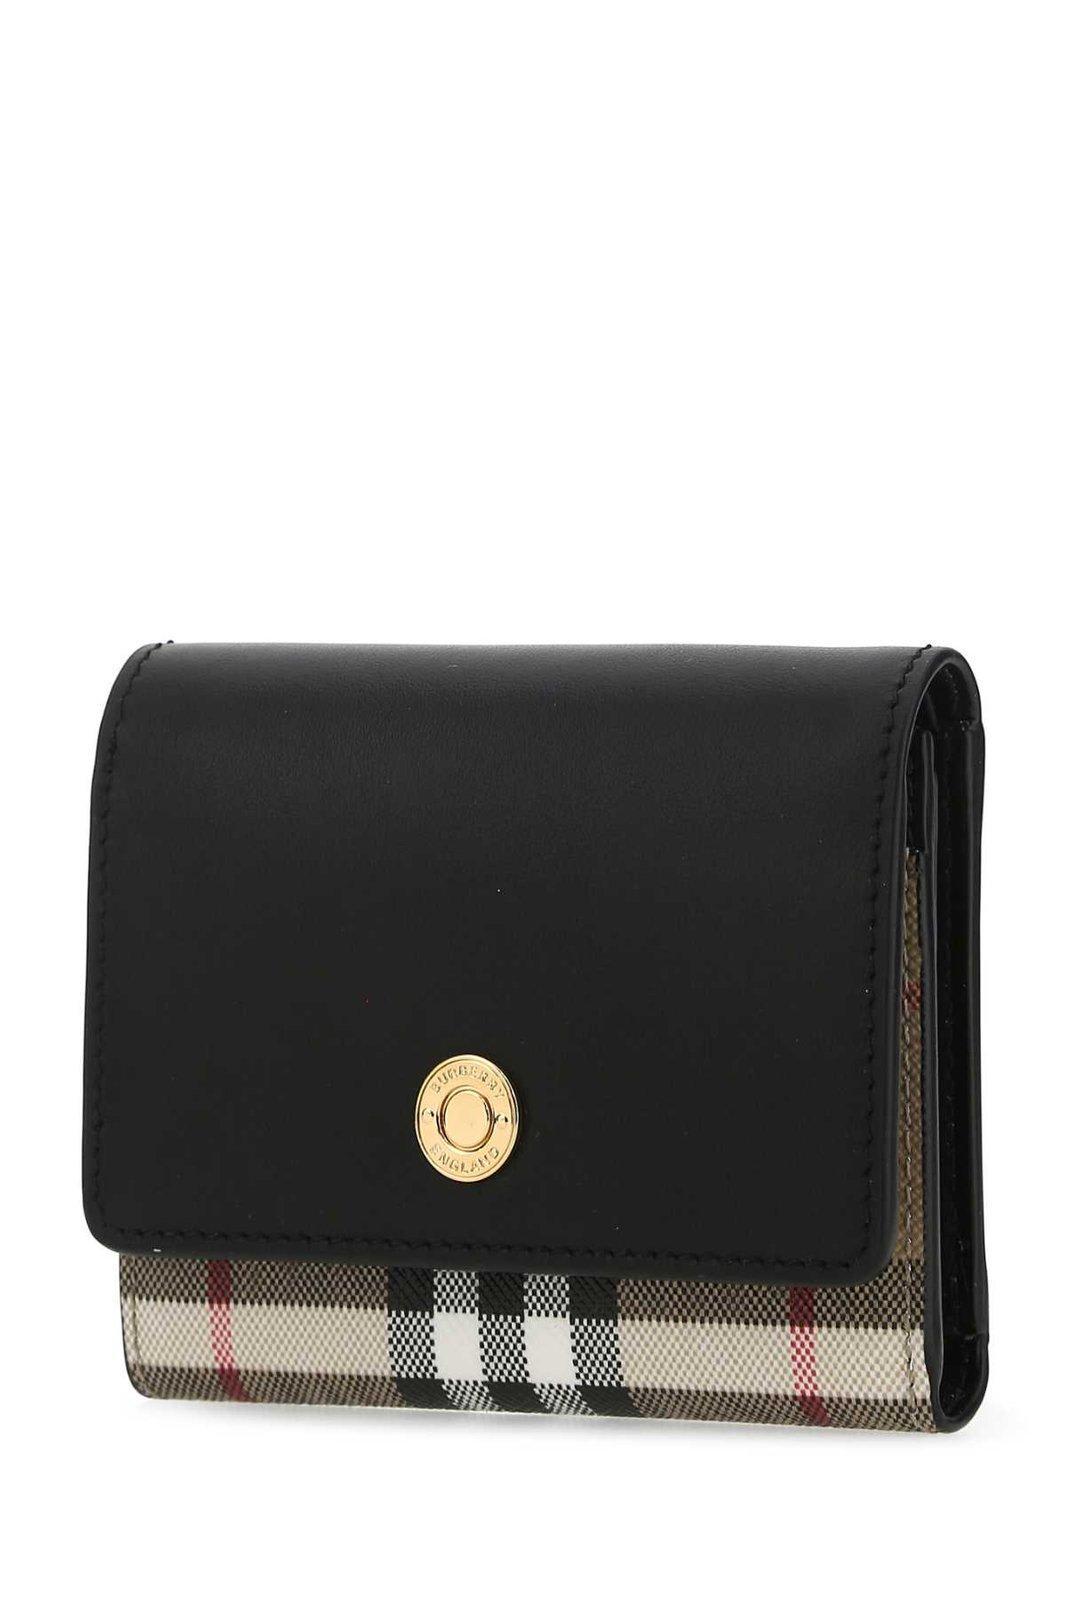 Burberry Small Leather Folding Wallet Black